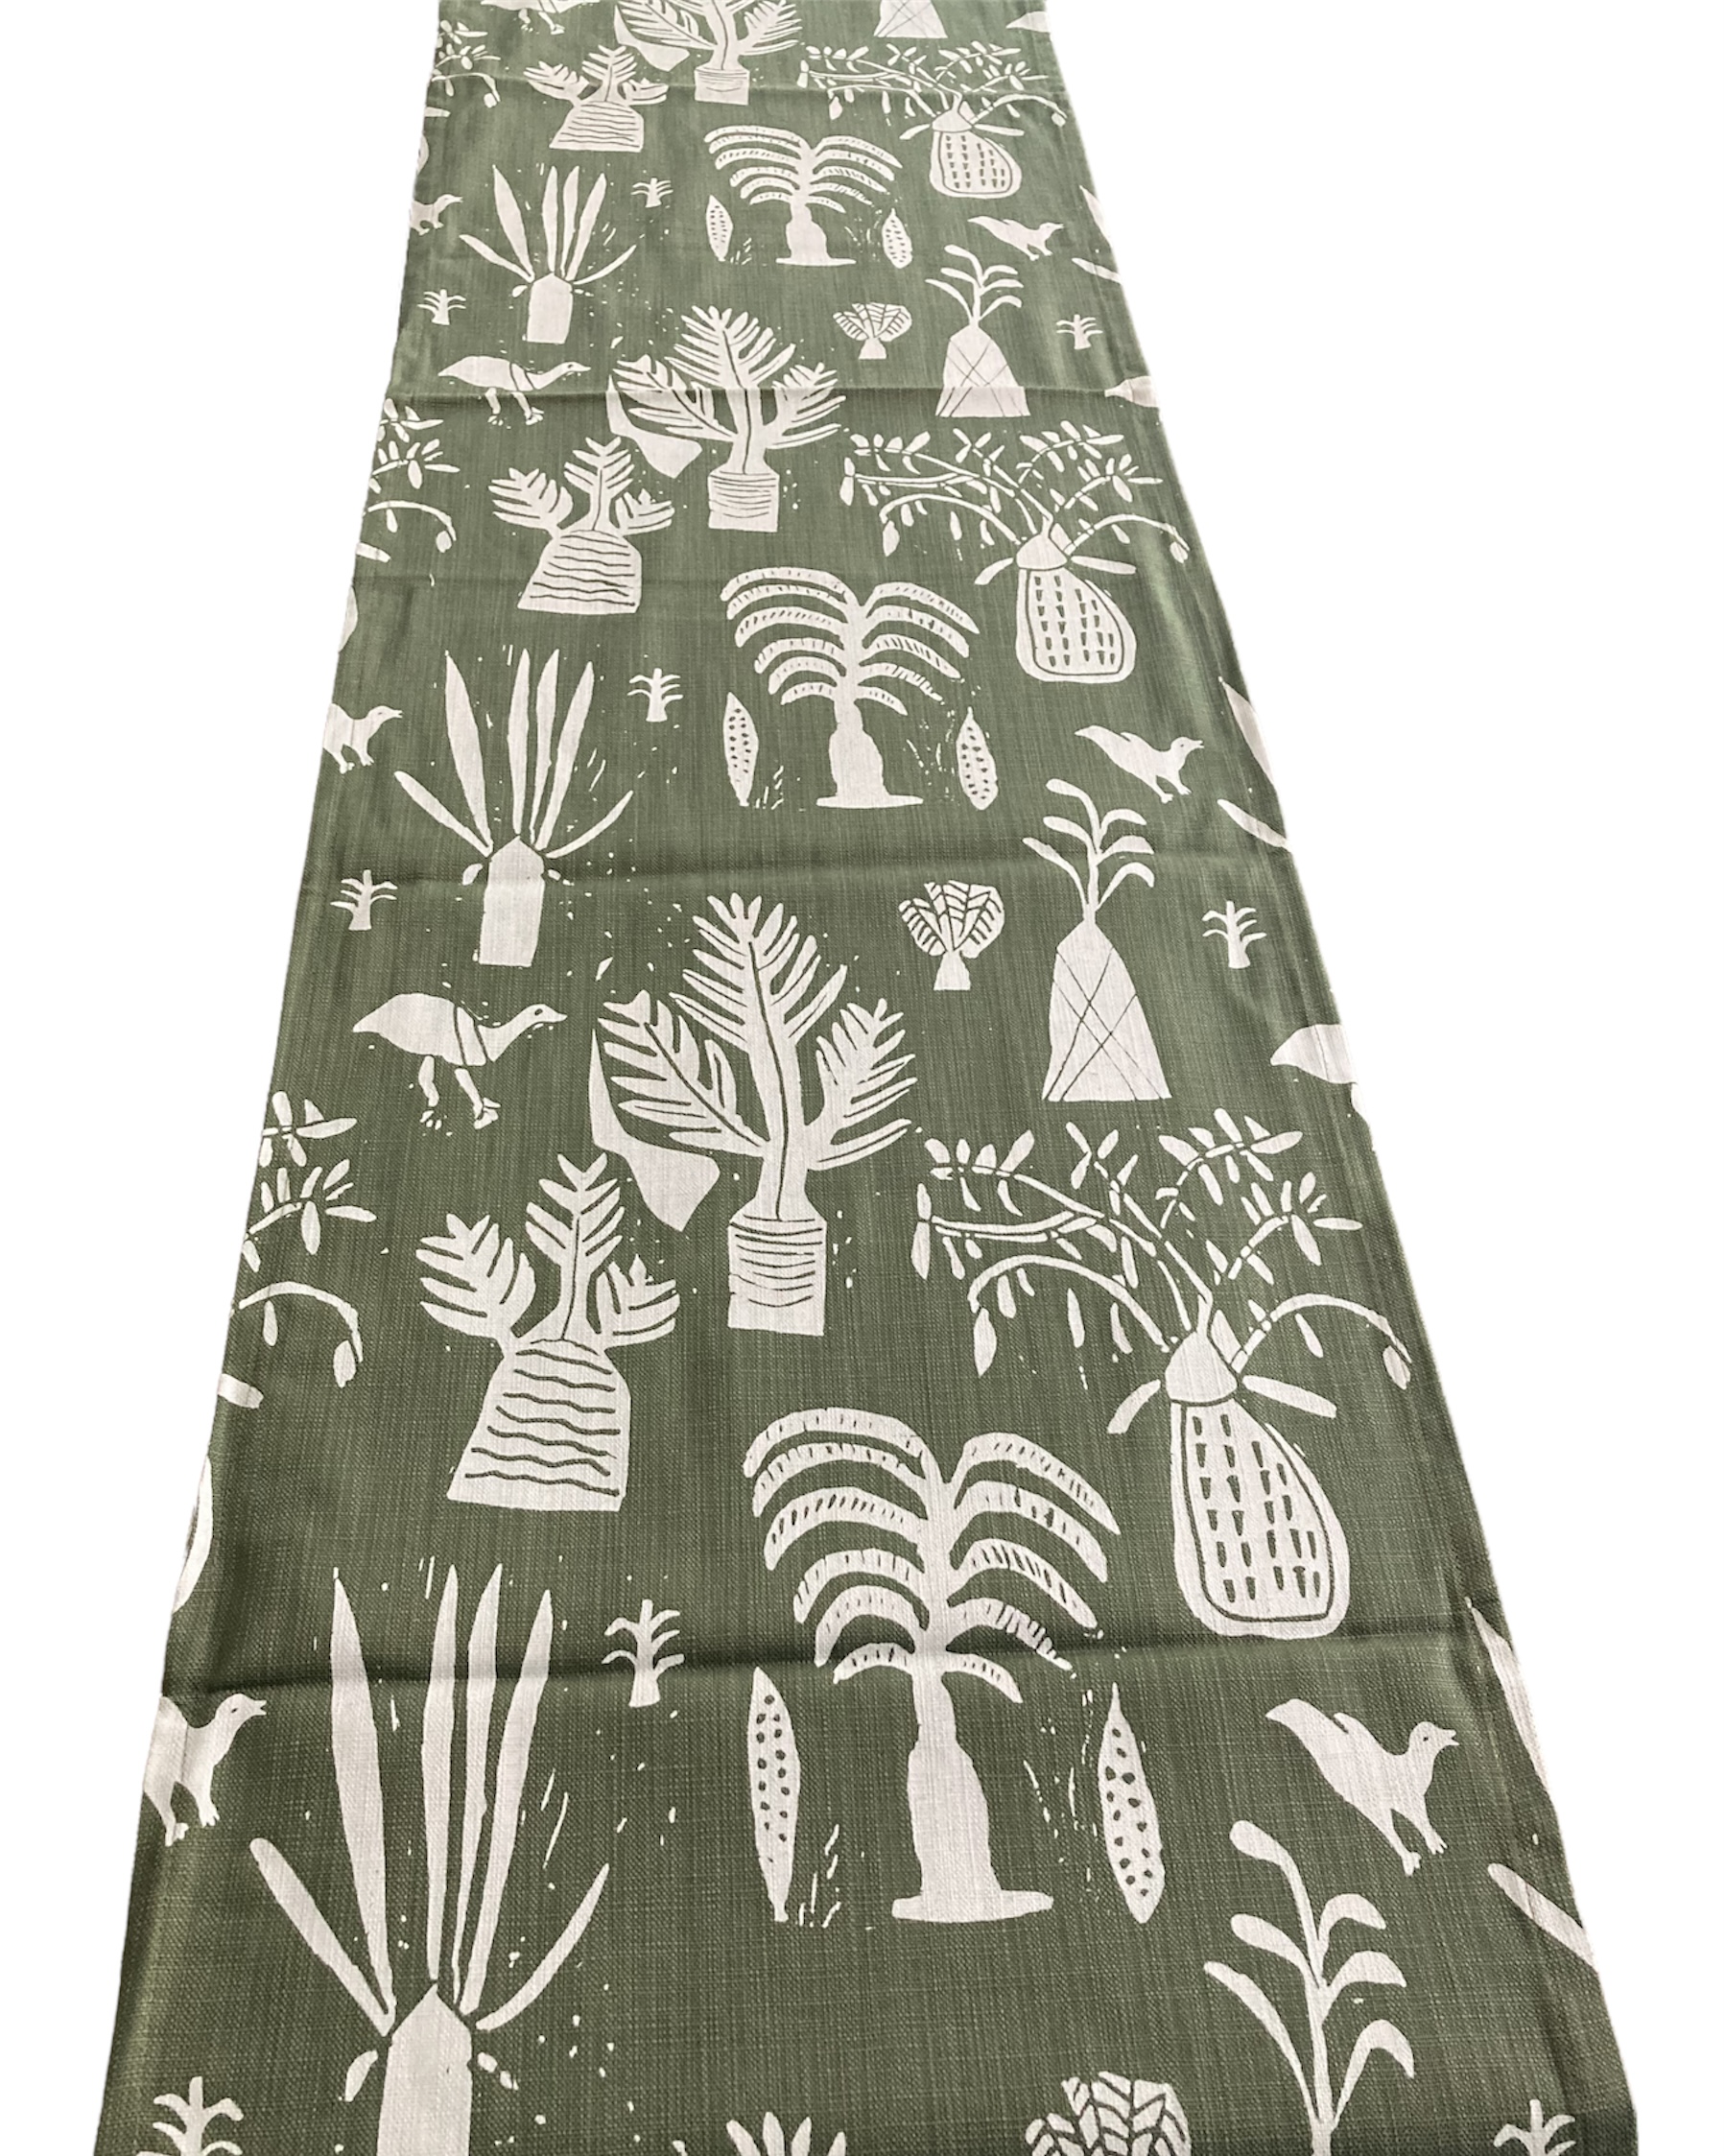 100% cotton Table Runner 96\" x 16\" from Namibia - Design 11l